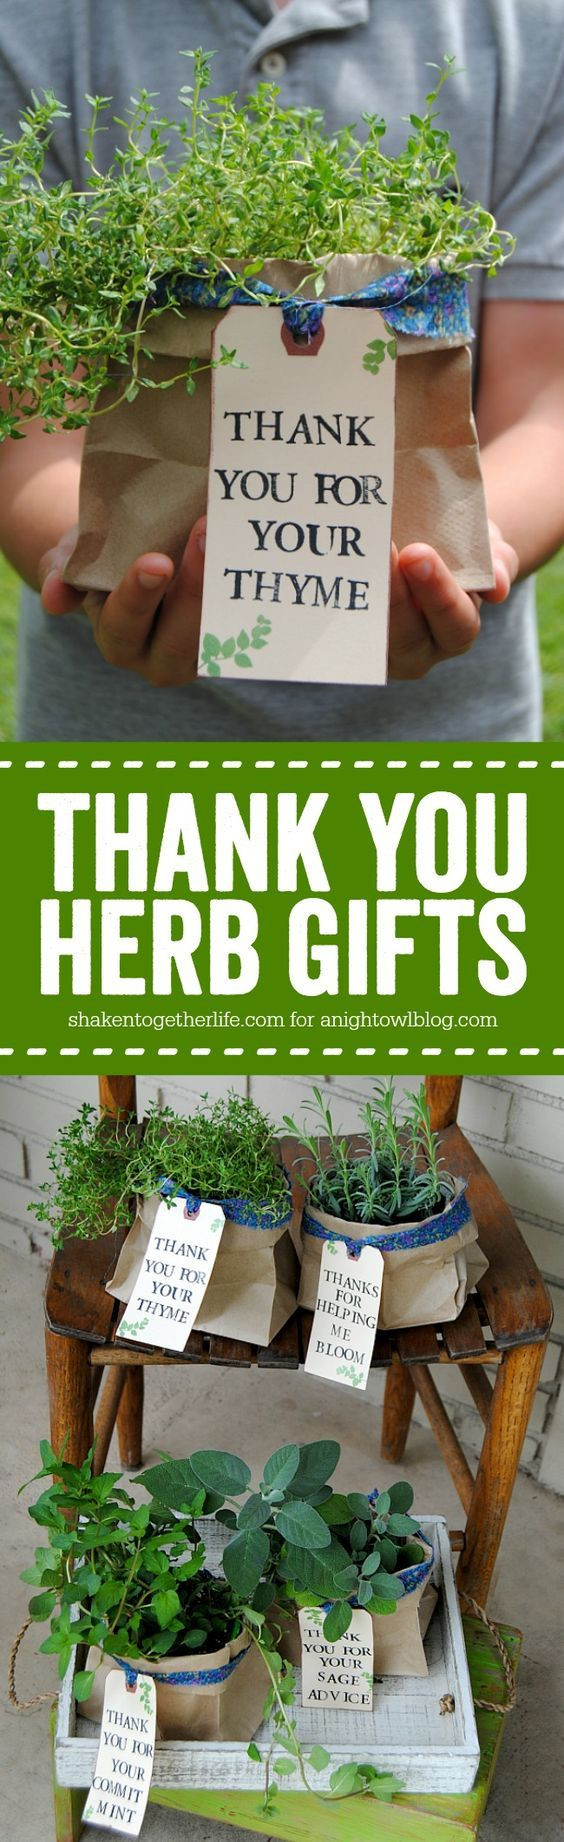 Thank You For Your Service Gift Ideas
 25 best ideas about Volunteer Gifts on Pinterest